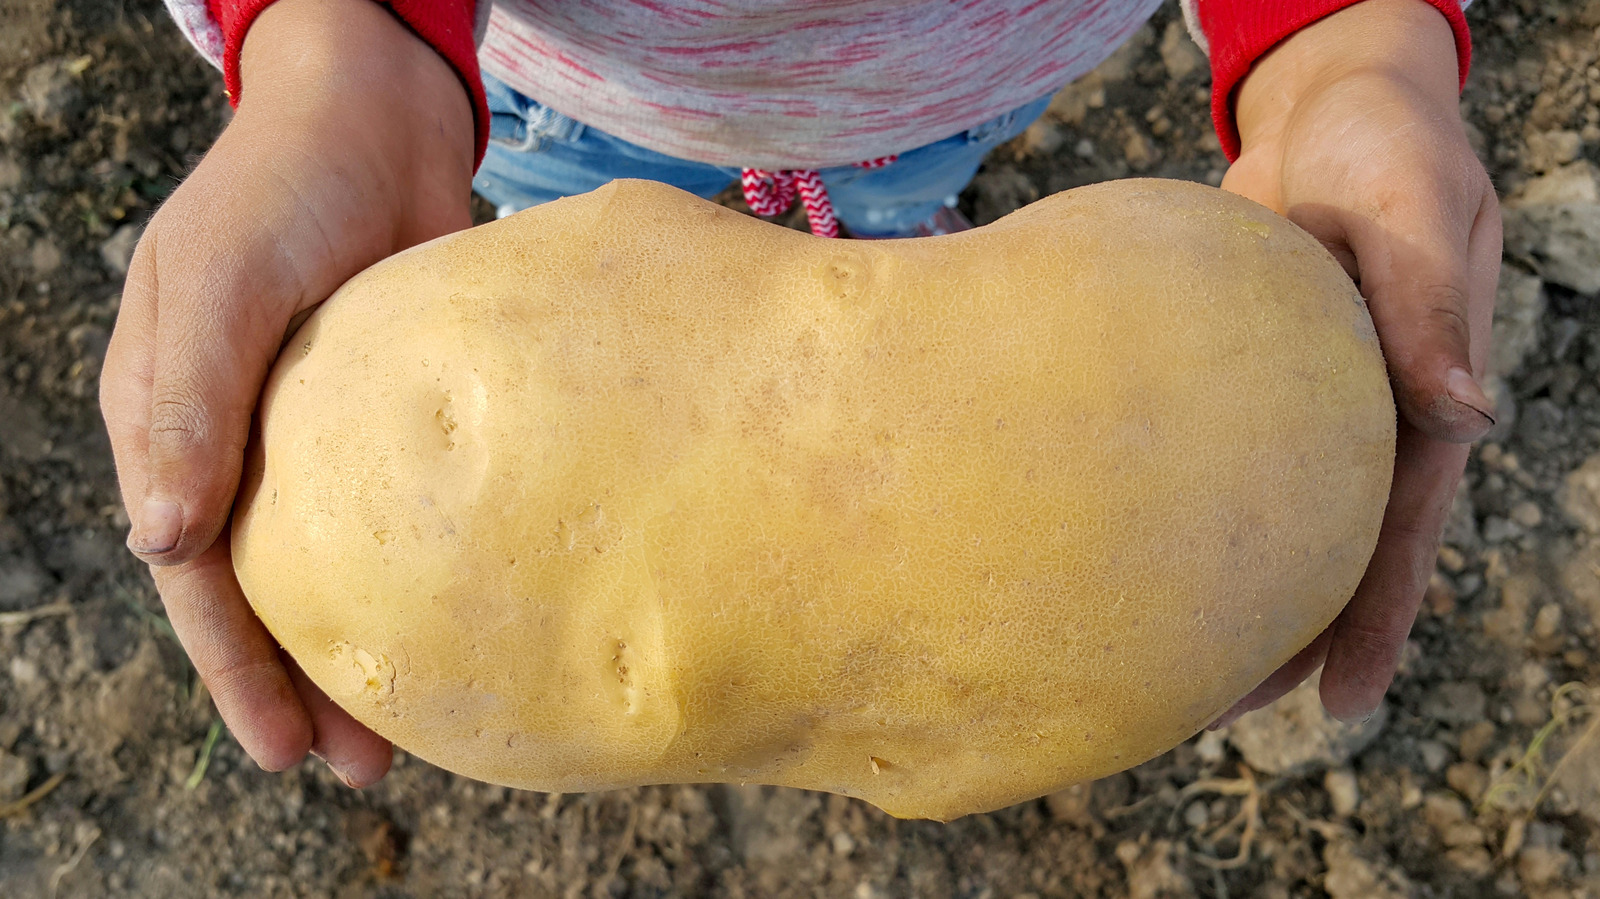 Turns Out, Guinness Was Right To Question The 'World's Largest Potato'